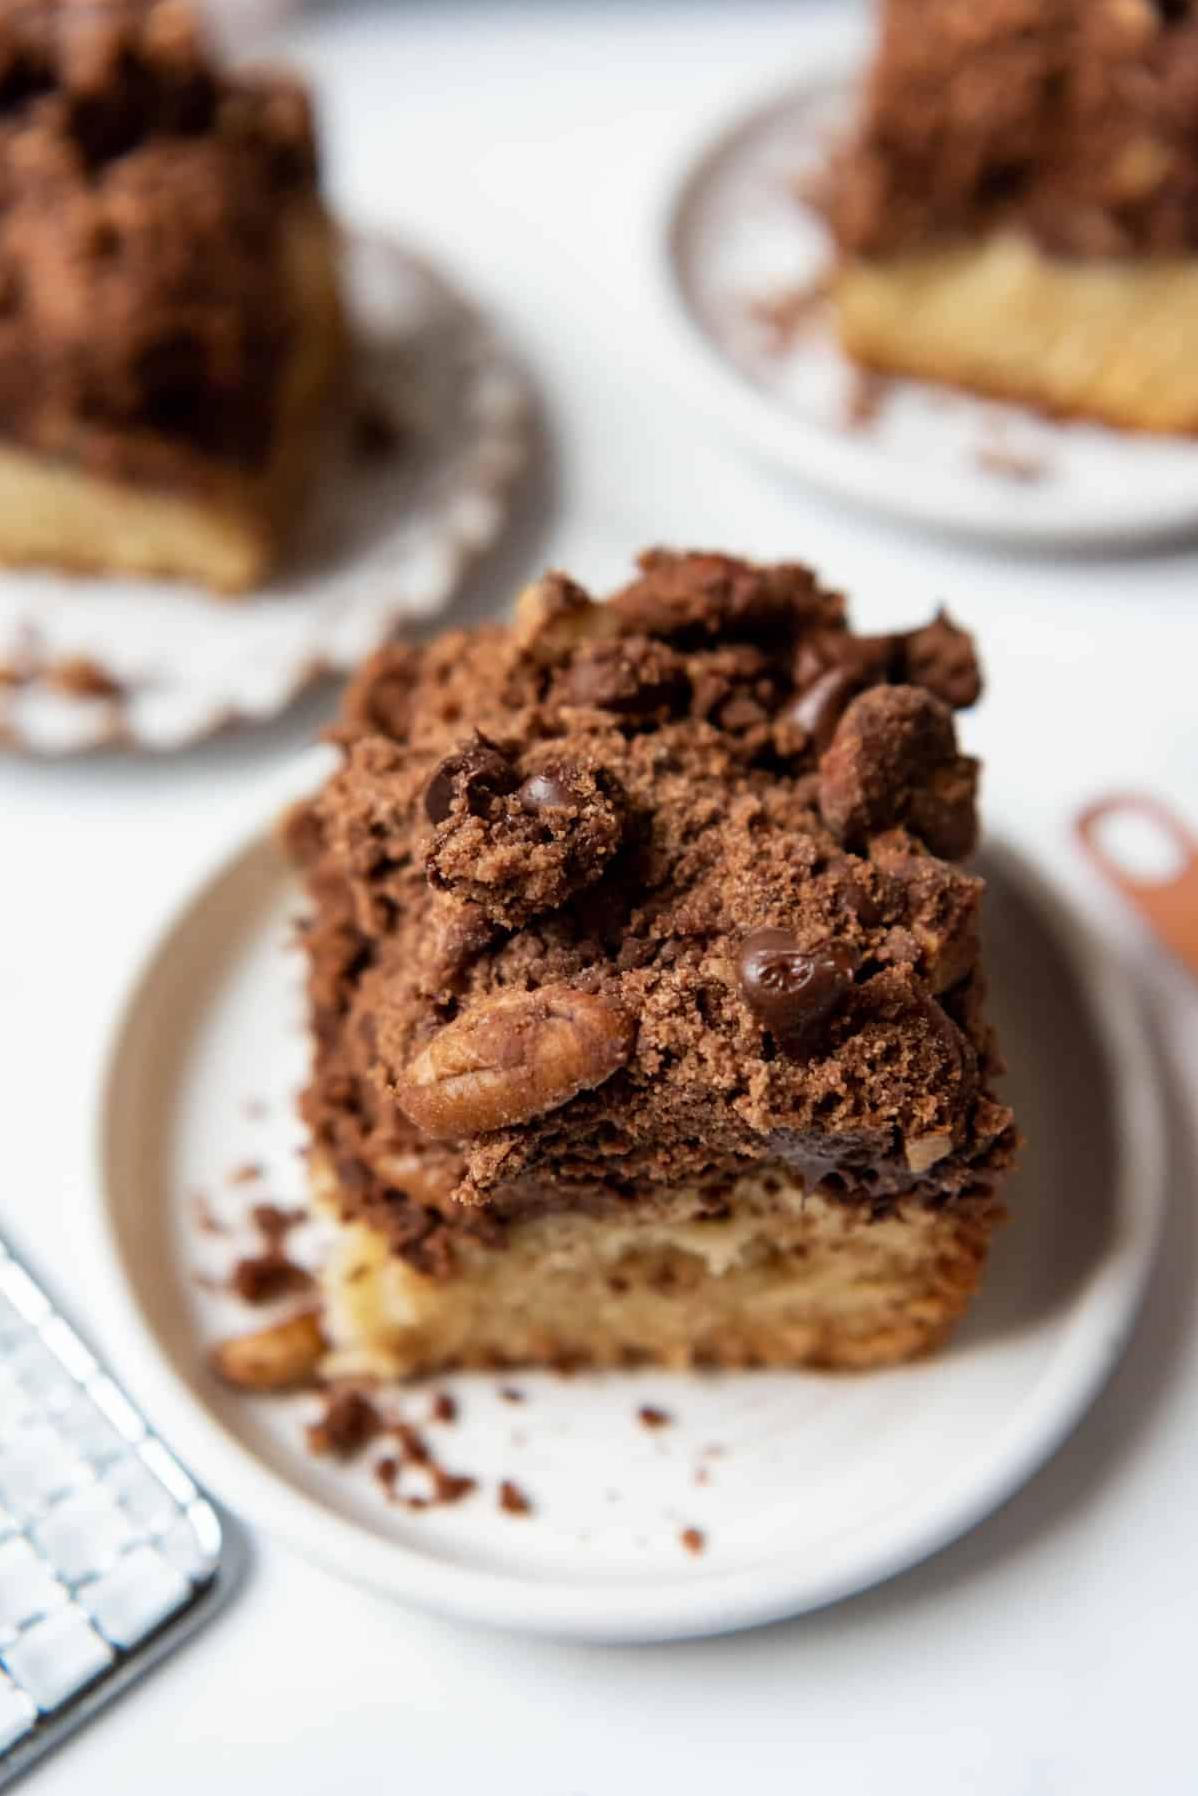  Get ready to fall in love with this delicious Chocolate-Chip Pecan Crumb Coffee Cake.